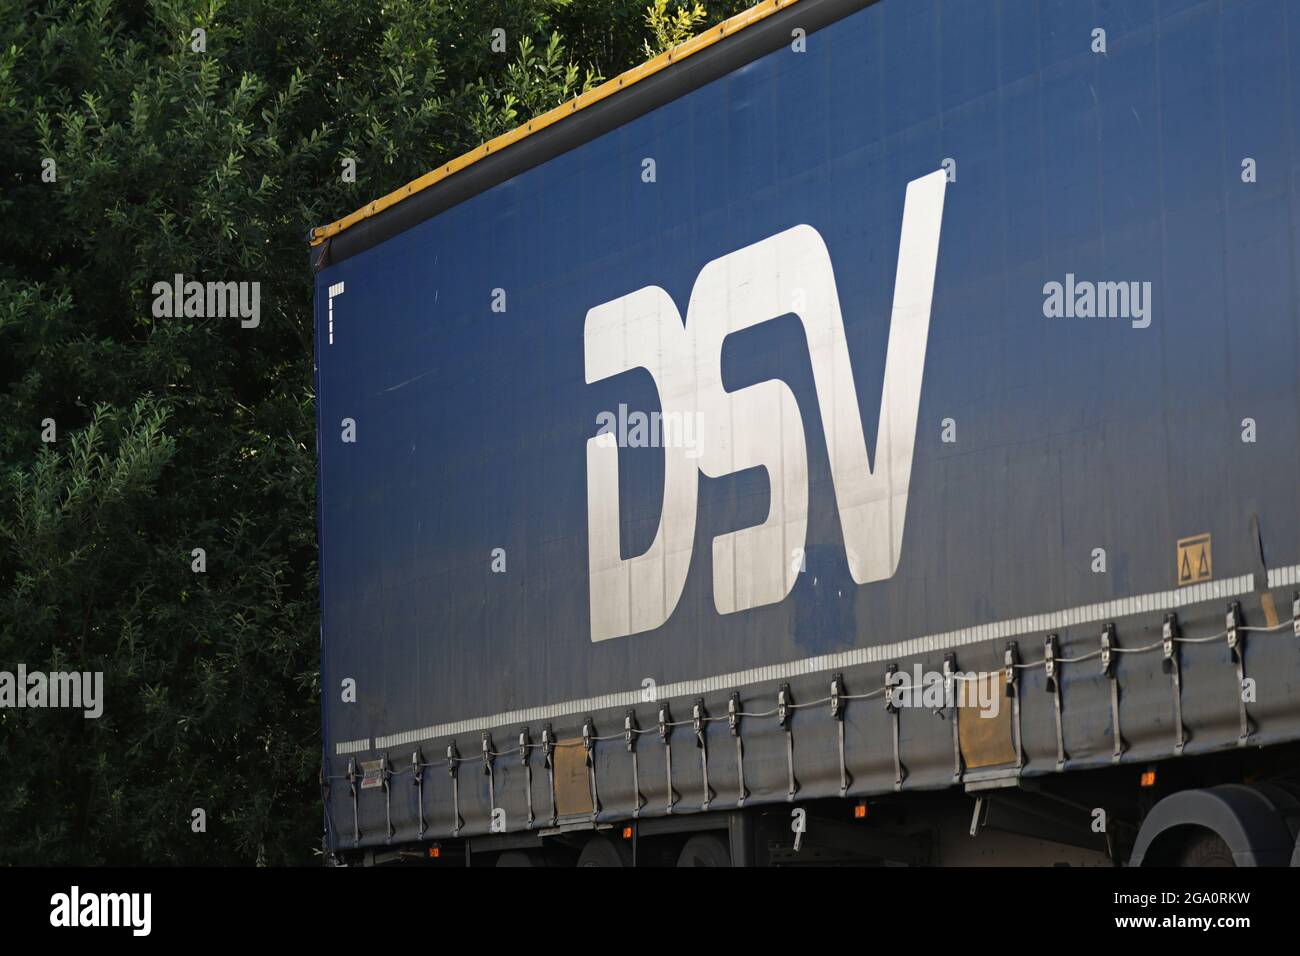 Truck trailor from DSV Panalpina A/S. Stock Photo